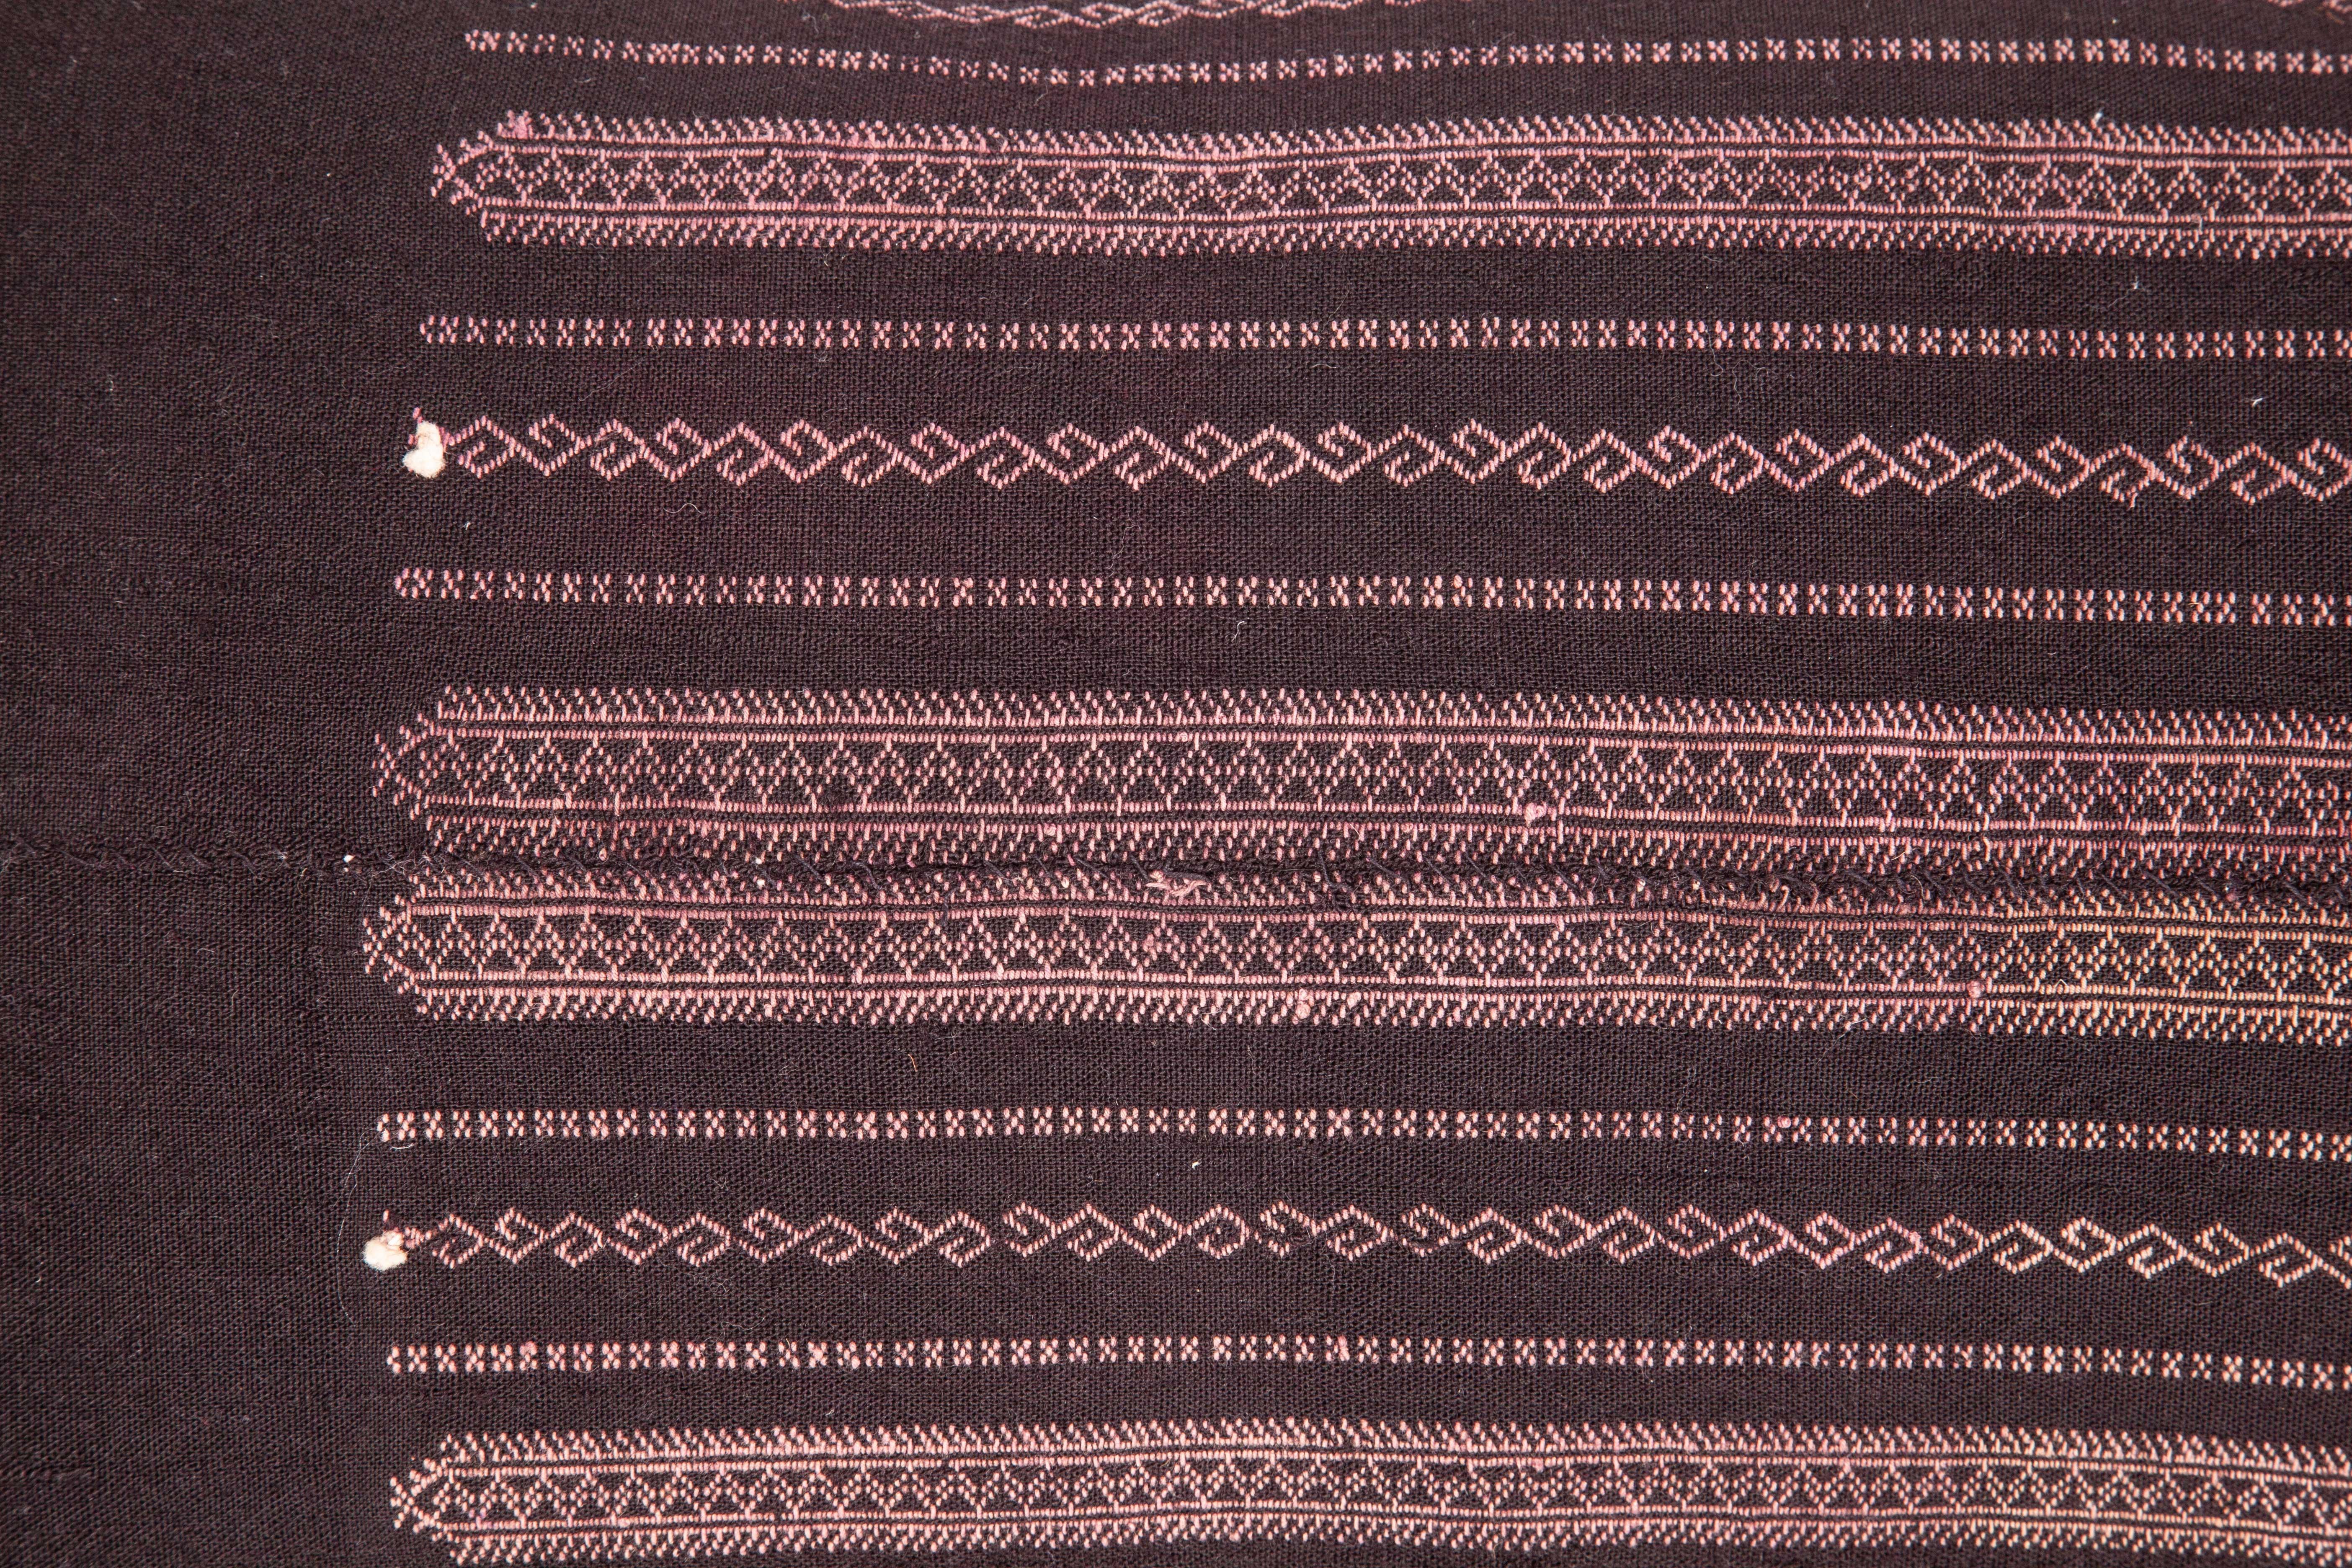 Suzani Old Embroidered Pillow Case Made from a Pomak Apron, Early 20th Century